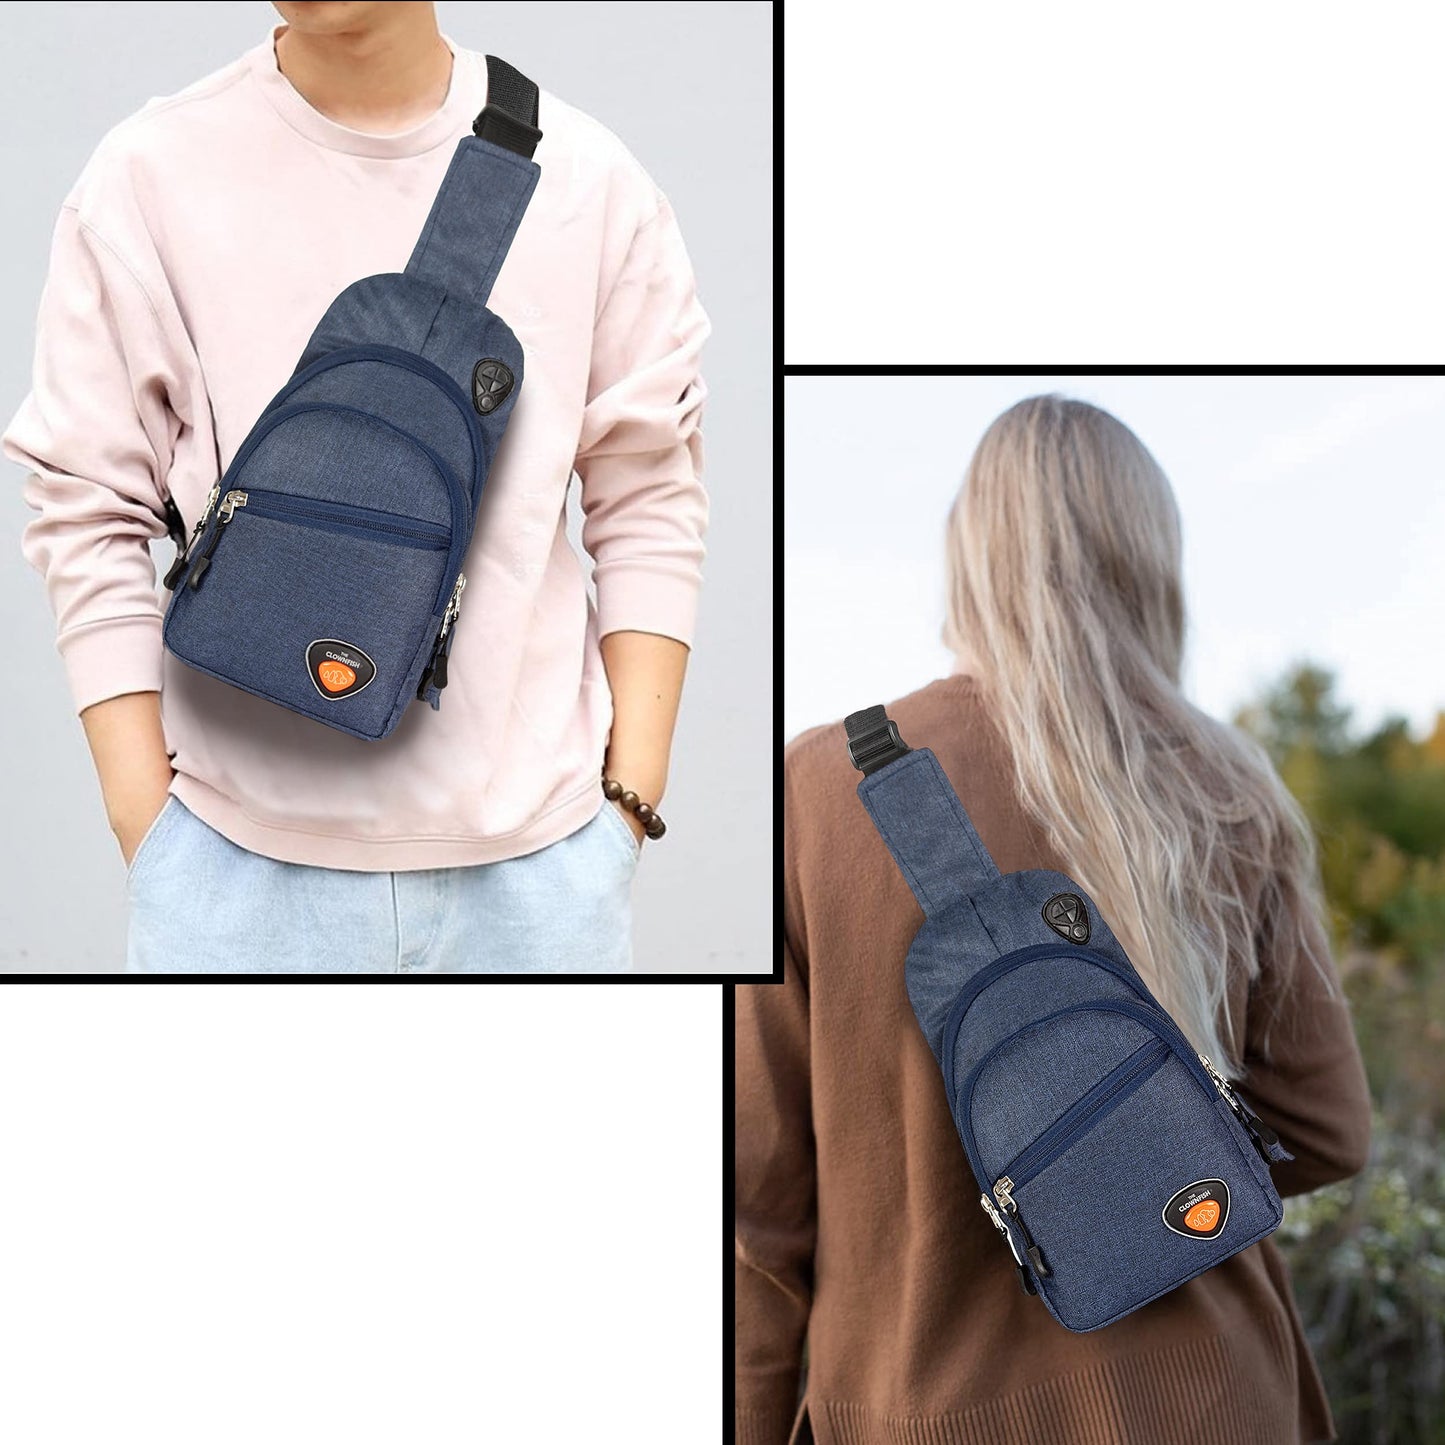 THE CLOWNFISH Cordette Unisex Polyester Casual Single Shoulder Sling Bag Crossbody Chest Bag with Earphone Hole Blue